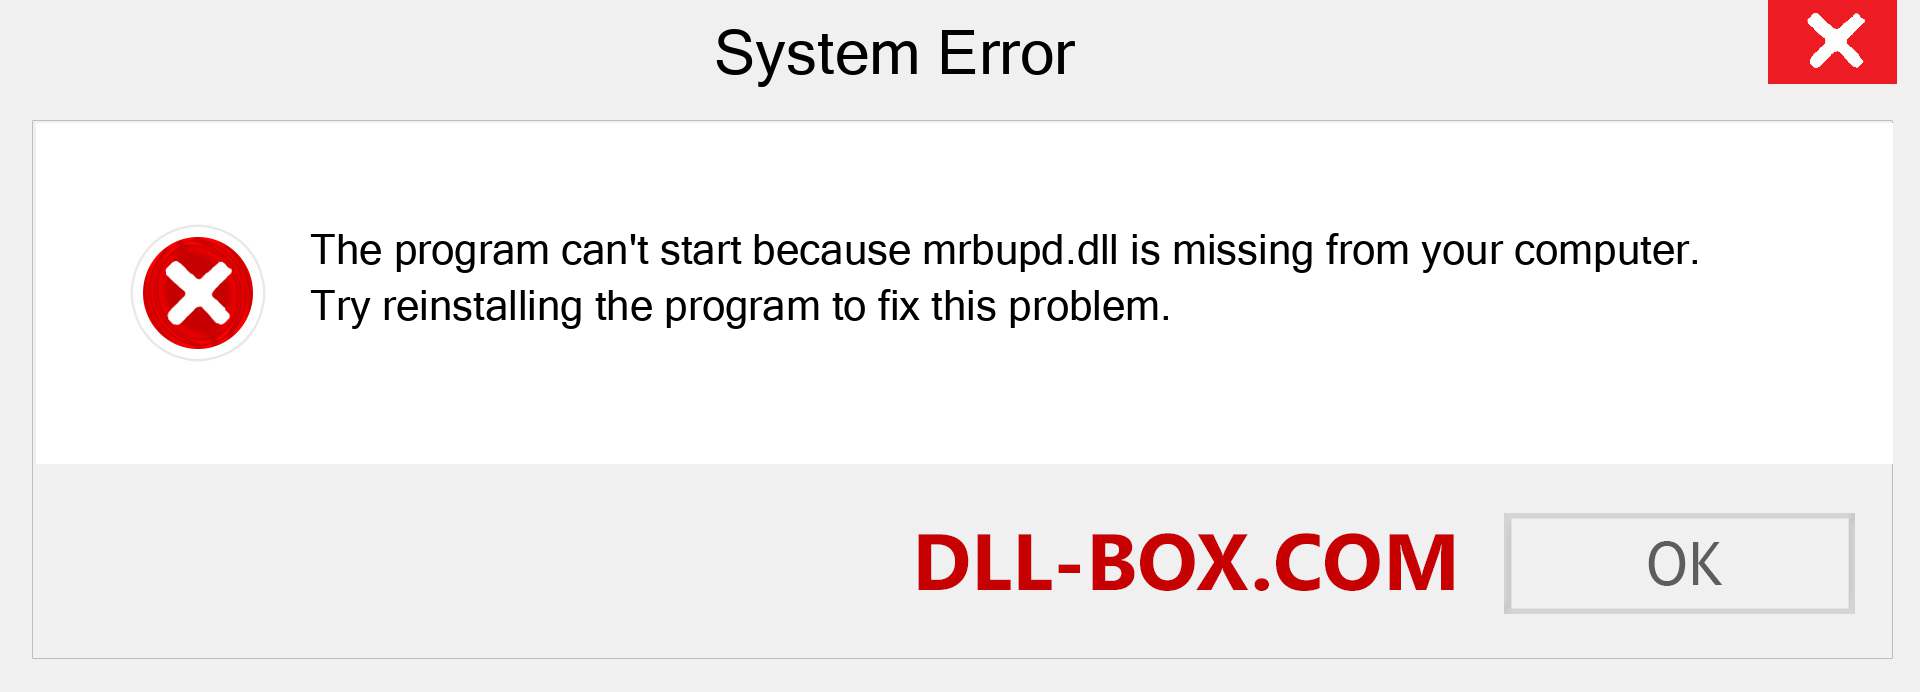  mrbupd.dll file is missing?. Download for Windows 7, 8, 10 - Fix  mrbupd dll Missing Error on Windows, photos, images